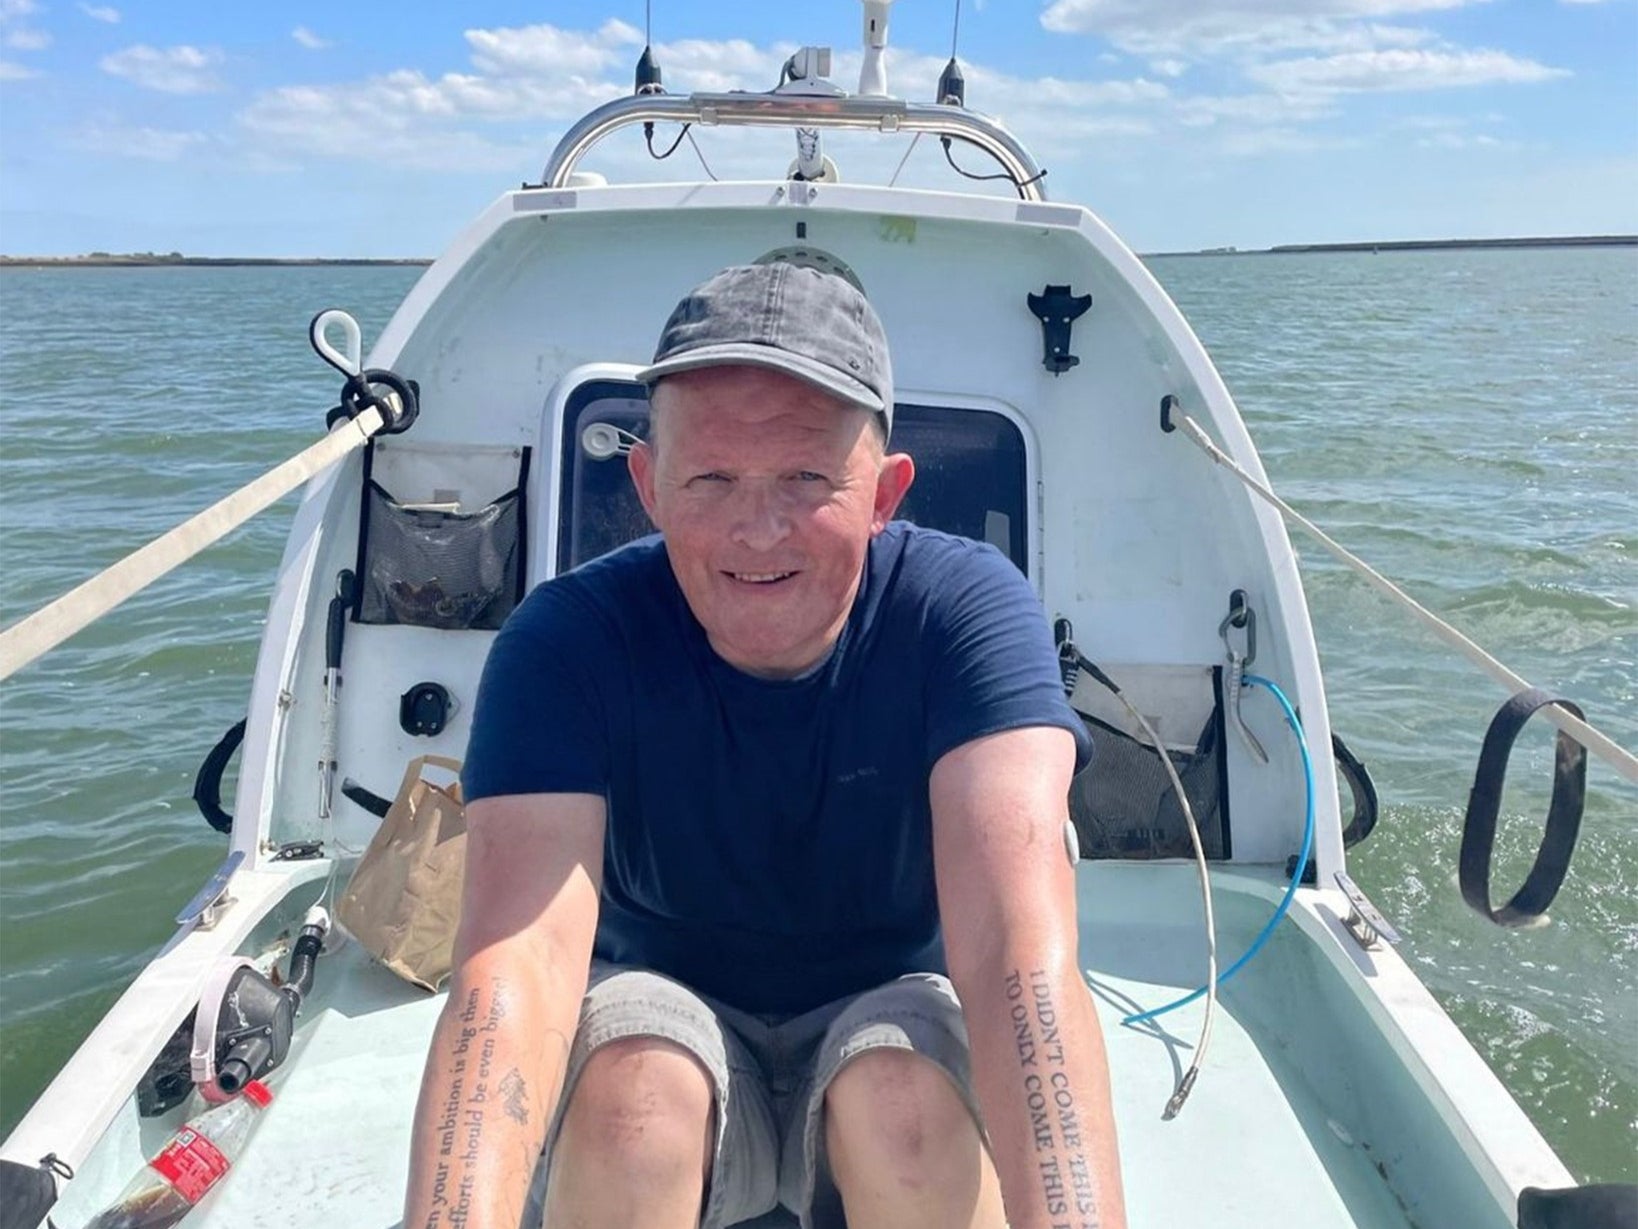 Michael Holt, 54,?began sailing on 24 January to row for two charities